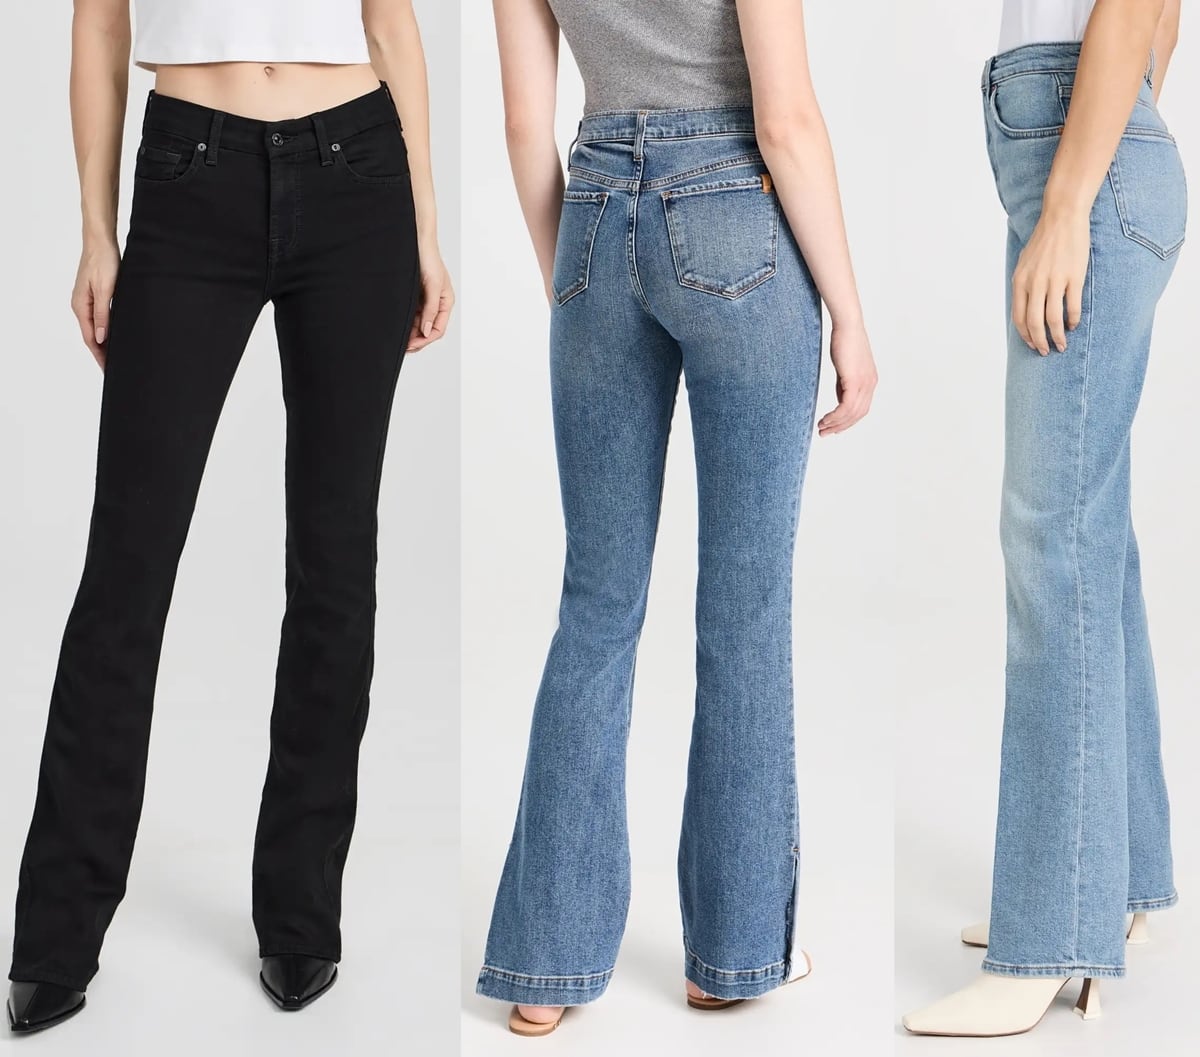 Bootcut jeans are a classic type of denim pants that are fitted through the hips and thighs, then flare out gently from the knee down to the ankle